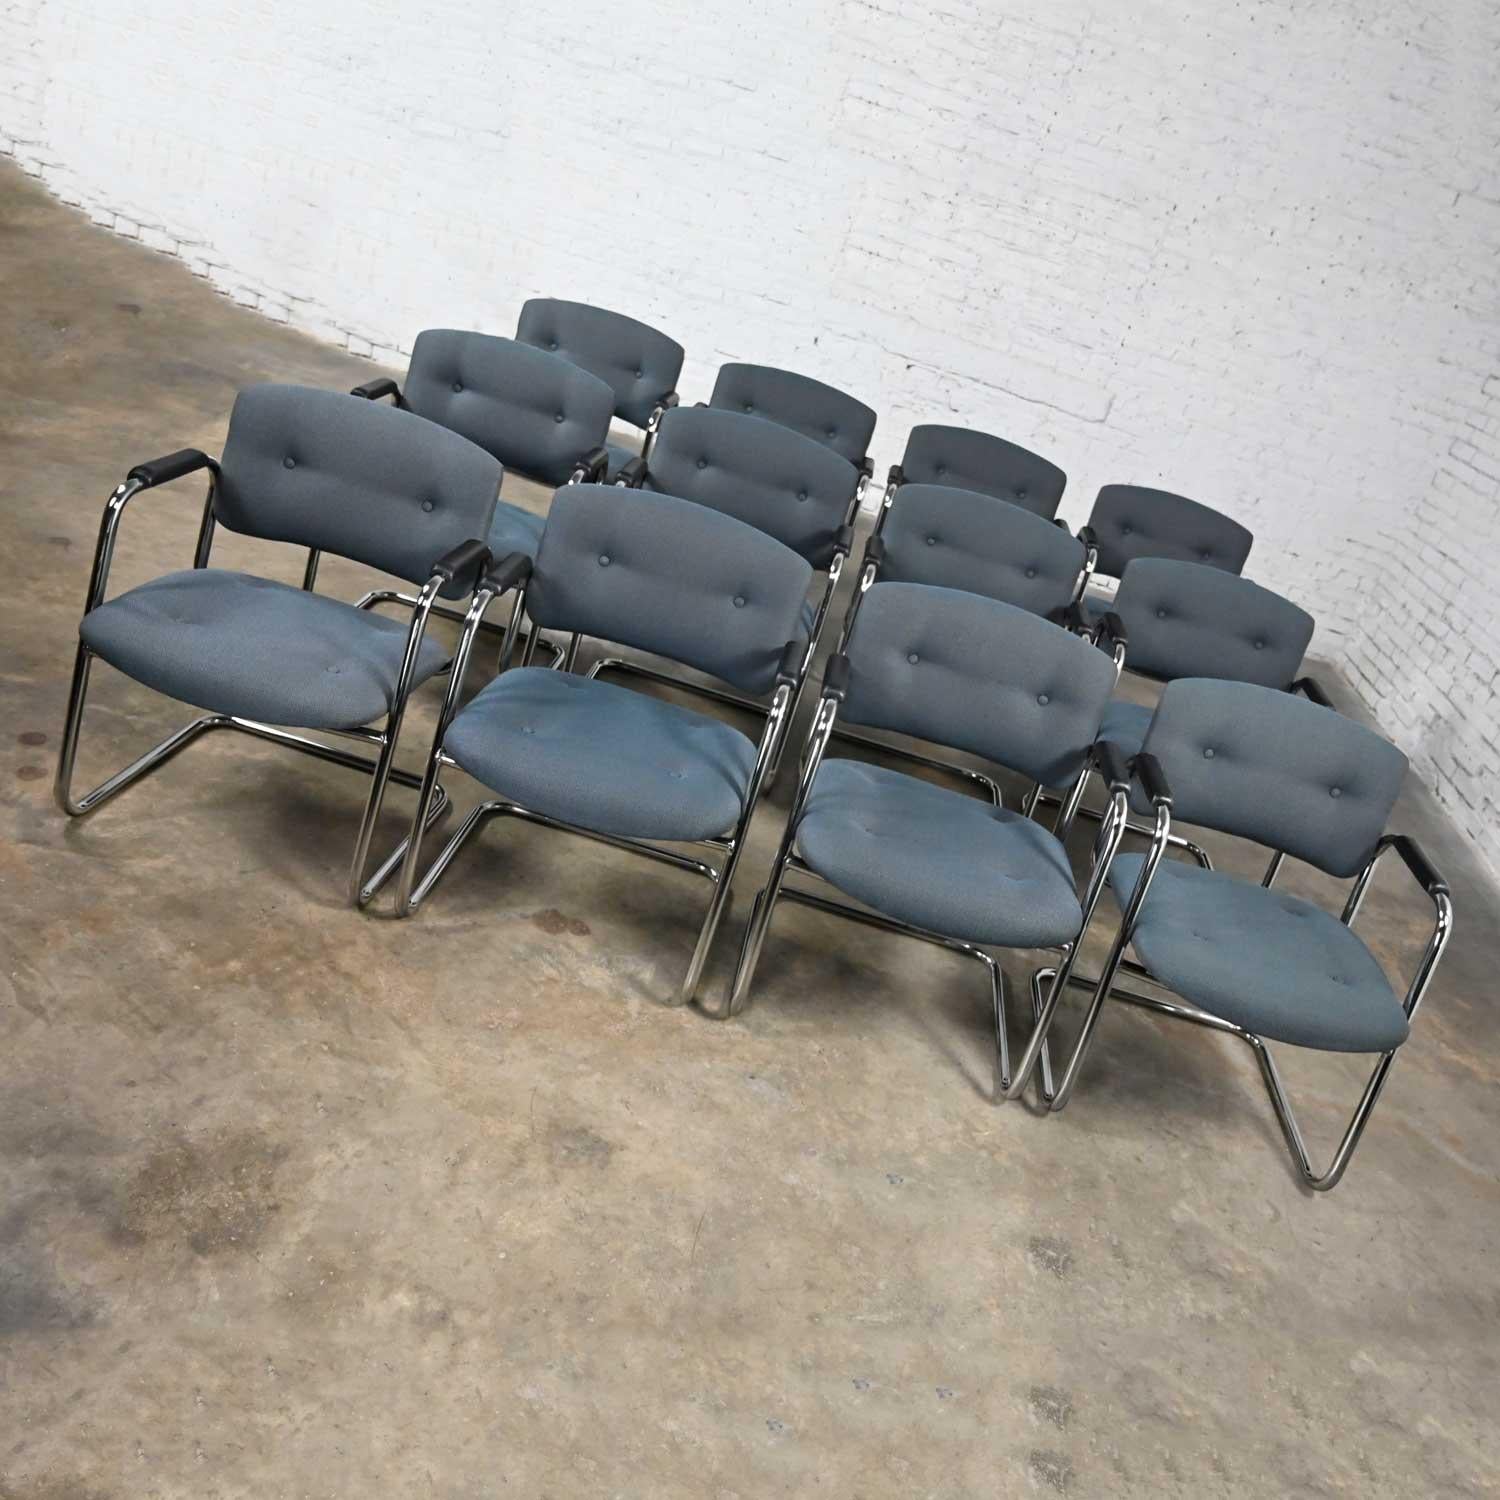 20th Century Vintage Chrome Cantilever Chairs United Chair Co Style Steelcase Sold Separately For Sale